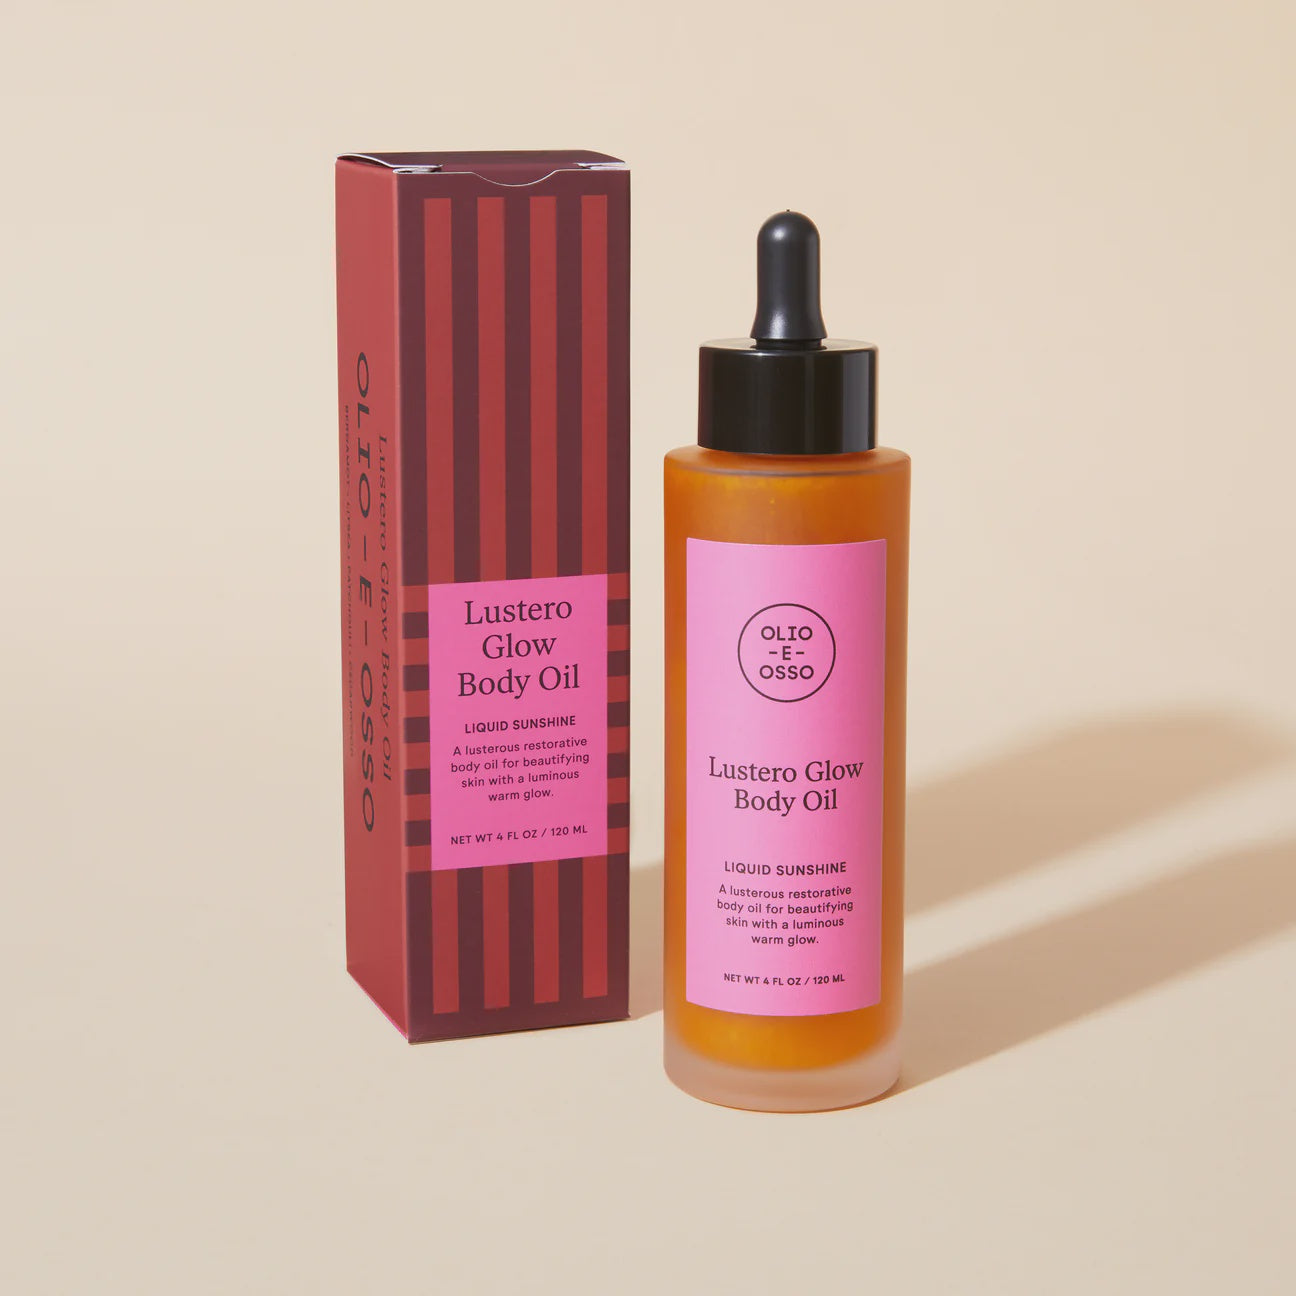 A bottle of Olio E Osso Lustero Glow Body Oil from Scottsdale, Arizona, next to its packaging. The bottle is amber with a dropper and the box is red with vertical pink stripes. Both items display the product name and details.